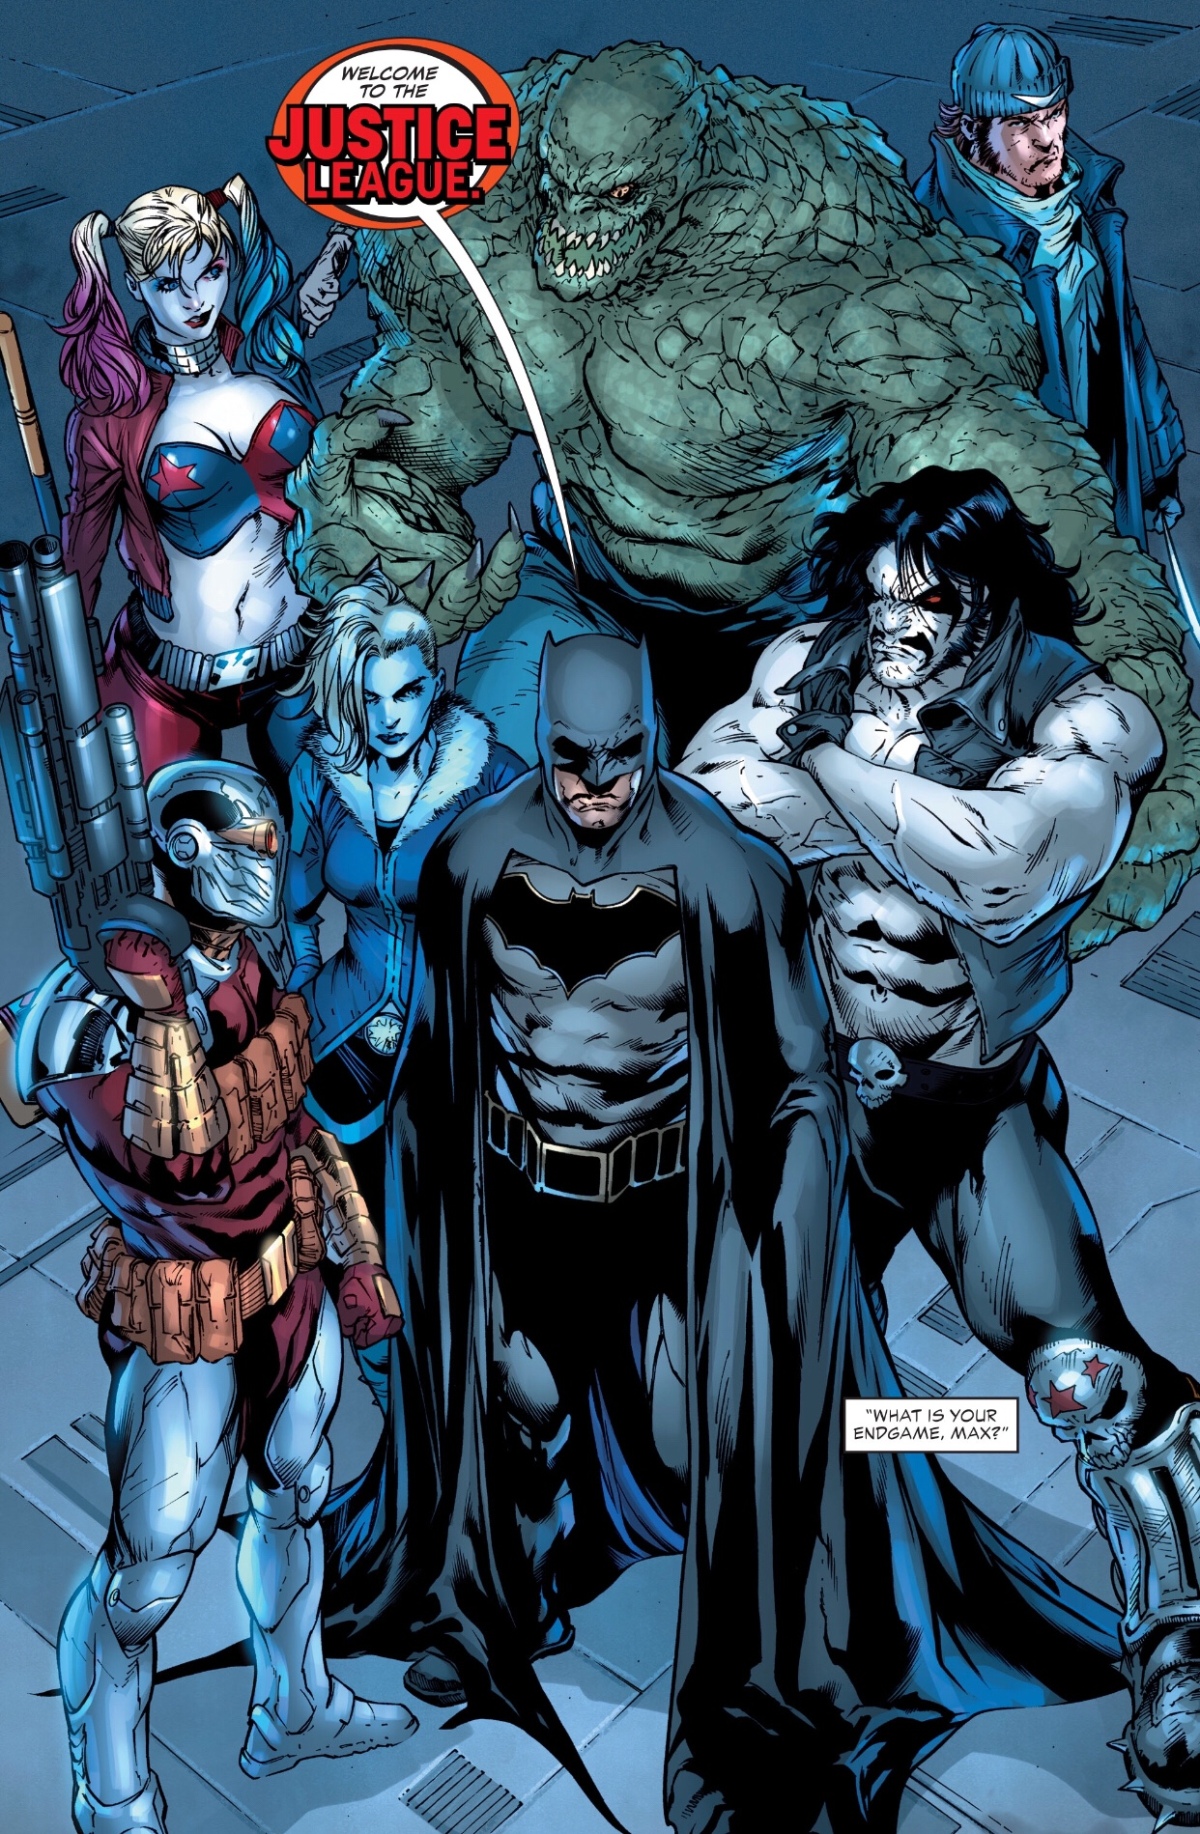 Welcome to the Justice League (Justice League vs. Suicide Squad)